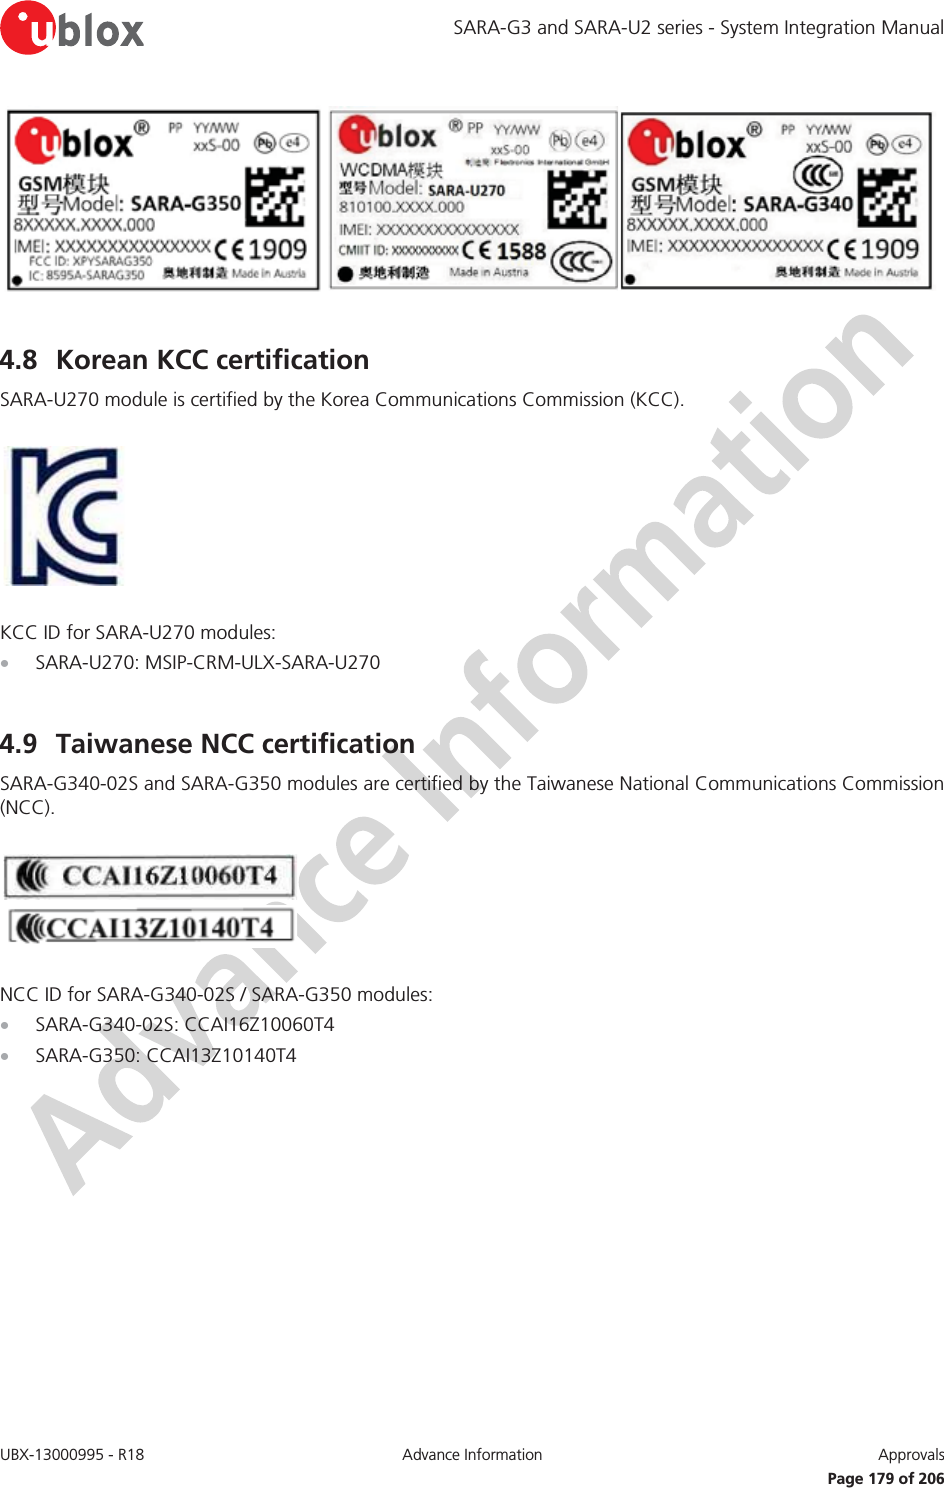 SARA-G3 and SARA-U2 series - System Integration Manual UBX-13000995 - R18  Advance Information  Approvals   Page 179 of 206   4.8 Korean KCC certification SARA-U270 module is certified by the Korea Communications Commission (KCC).    KCC ID for SARA-U270 modules: x SARA-U270: MSIP-CRM-ULX-SARA-U270  4.9 Taiwanese NCC certification SARA-G340-02S and SARA-G350 modules are certified by the Taiwanese National Communications Commission (NCC).     NCC ID for SARA-G340-02S / SARA-G350 modules: x SARA-G340-02S: CCAI16Z10060T4 x SARA-G350: CCAI13Z10140T4  